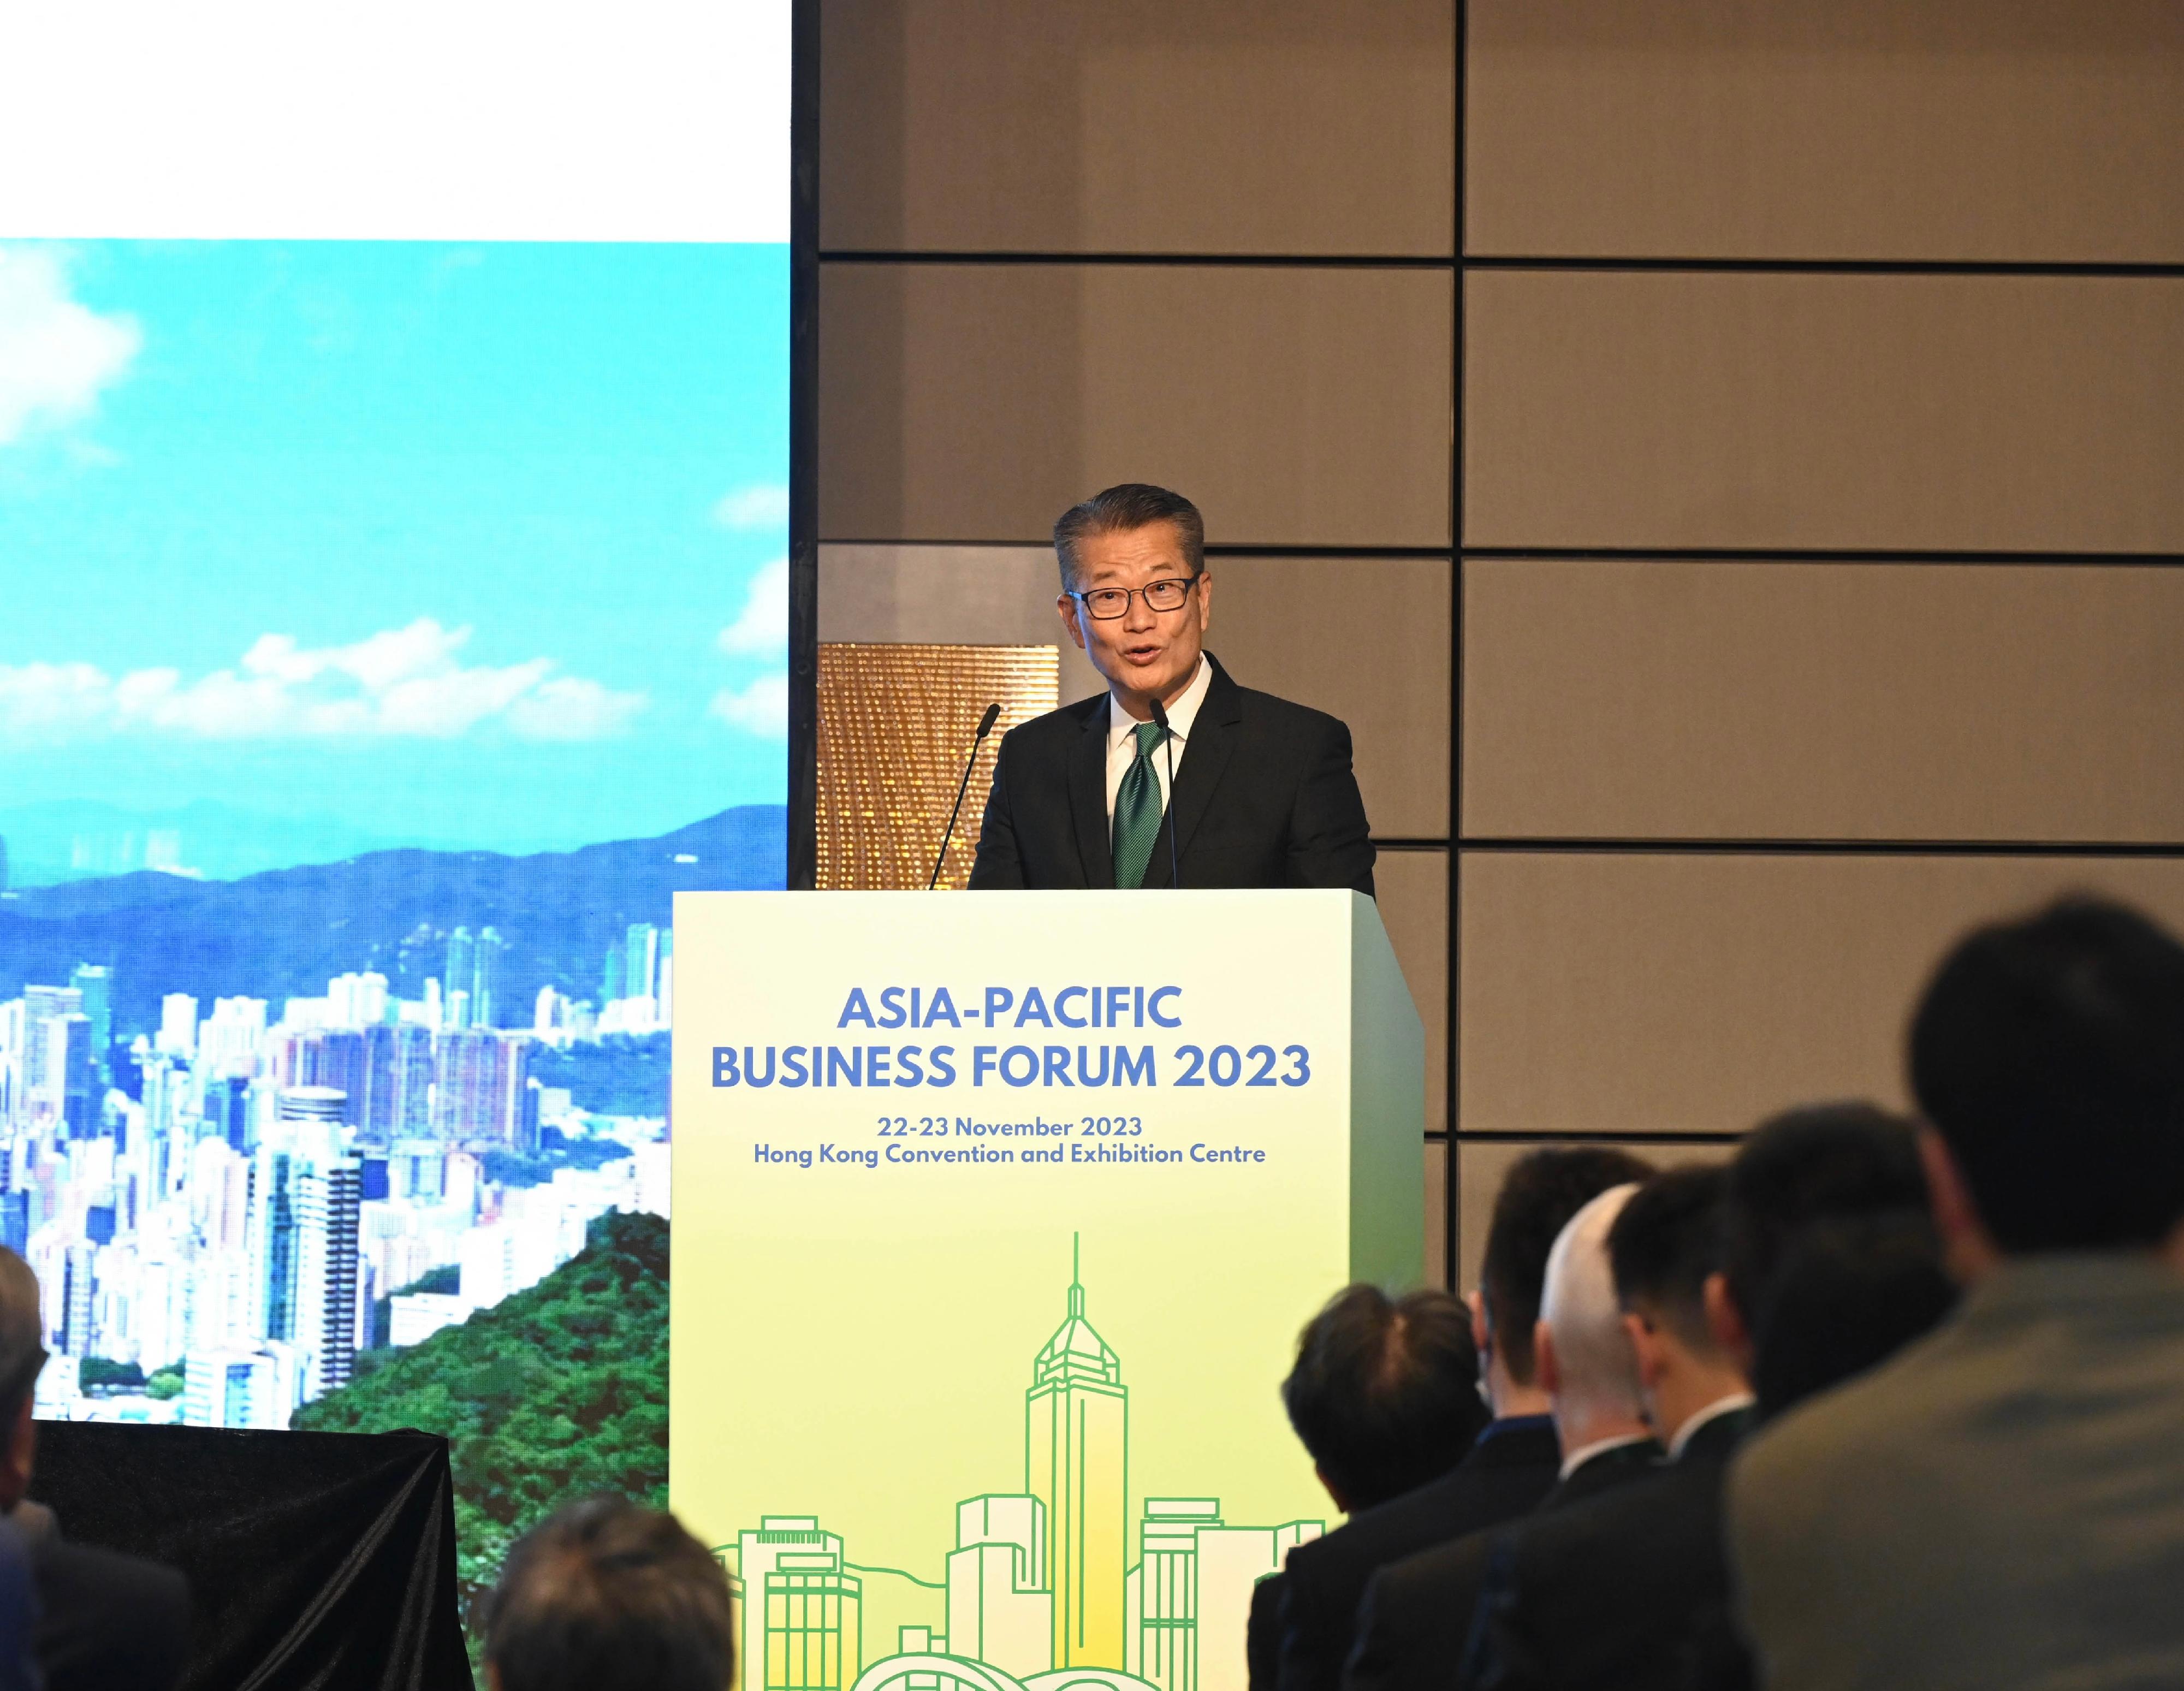 The Financial Secretary, Mr Paul Chan, speaks at the Asia-Pacific Business Forum 2023 organised by the United Nations Economic and Social Commission for Asia and the Pacific (ESCAP) and the ESCAP Sustainable Business Network this morning (November 22).